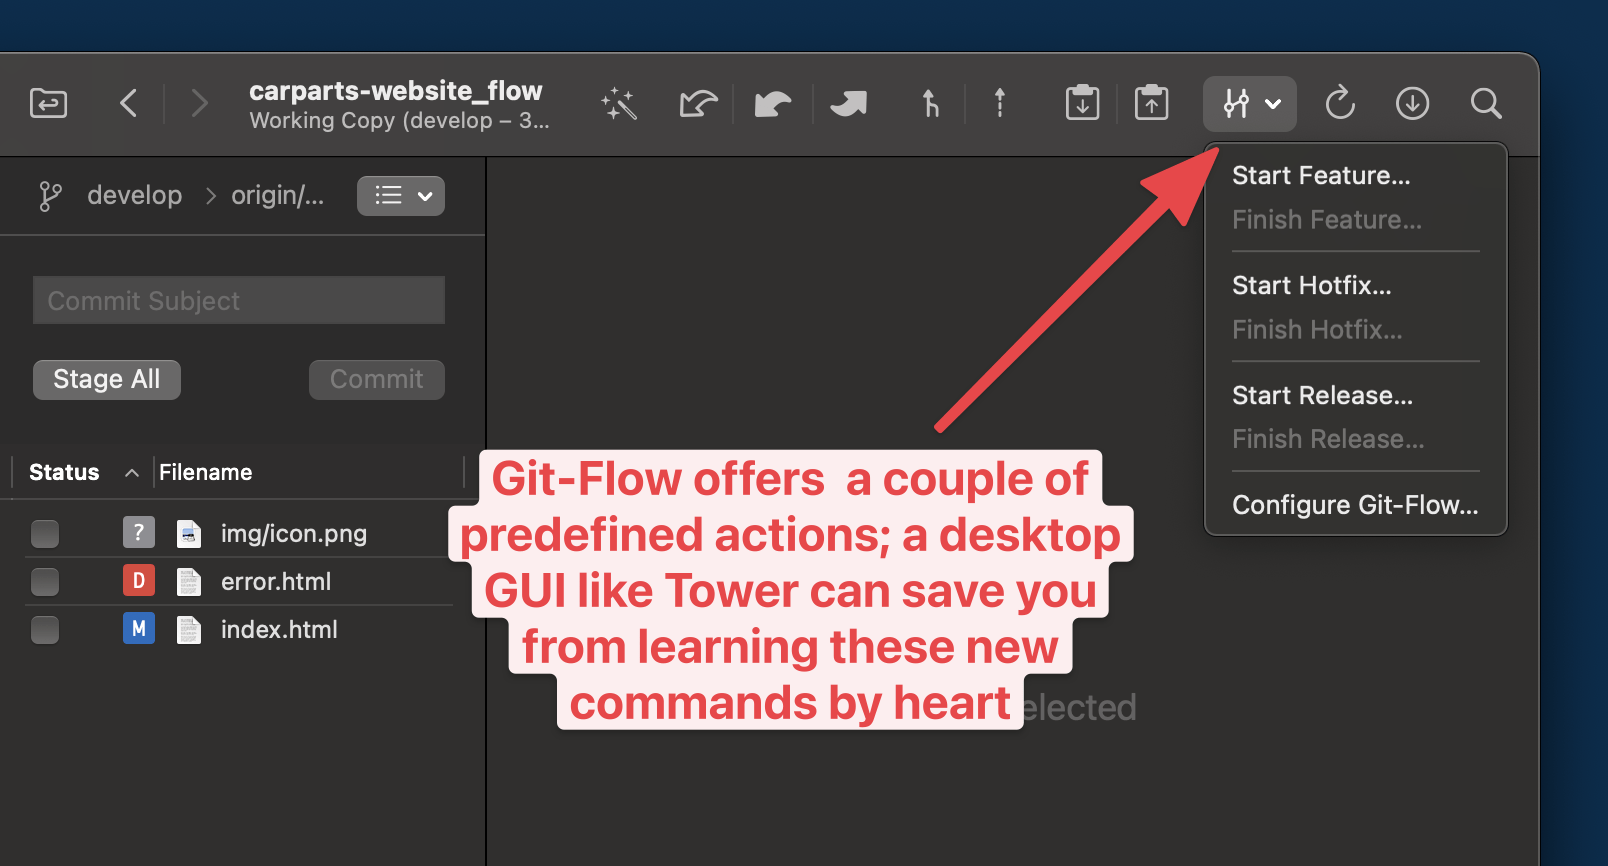 Git Flow offers a couple of predefined actions: a desktop GUI like Tower can save you from learning these new commands by heart.